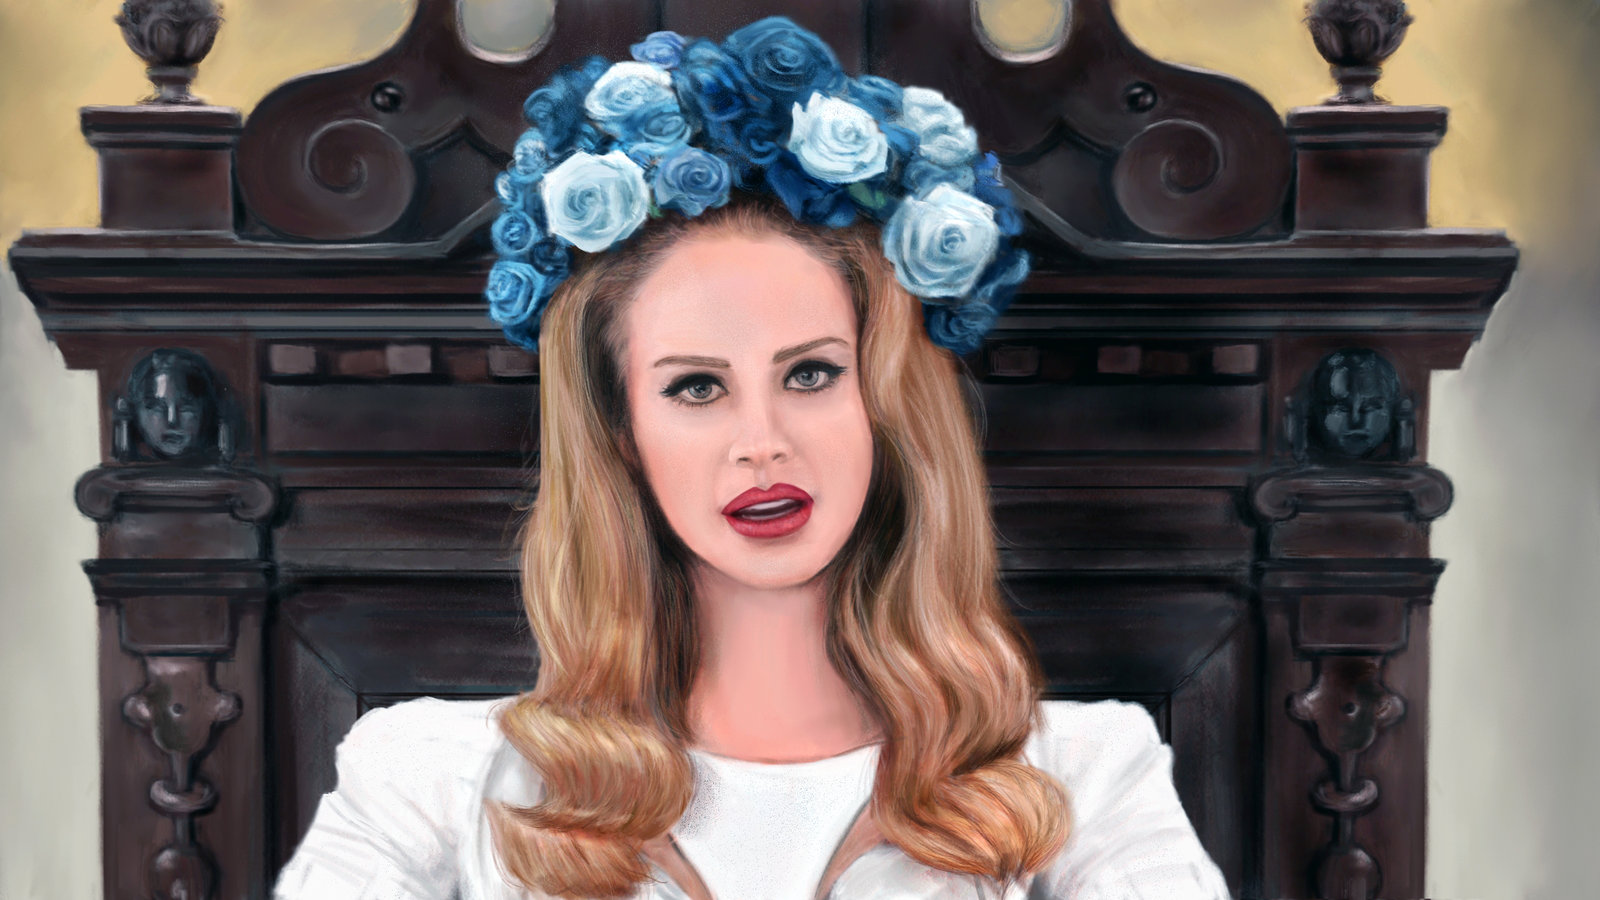 Lana del Rey by crushtested